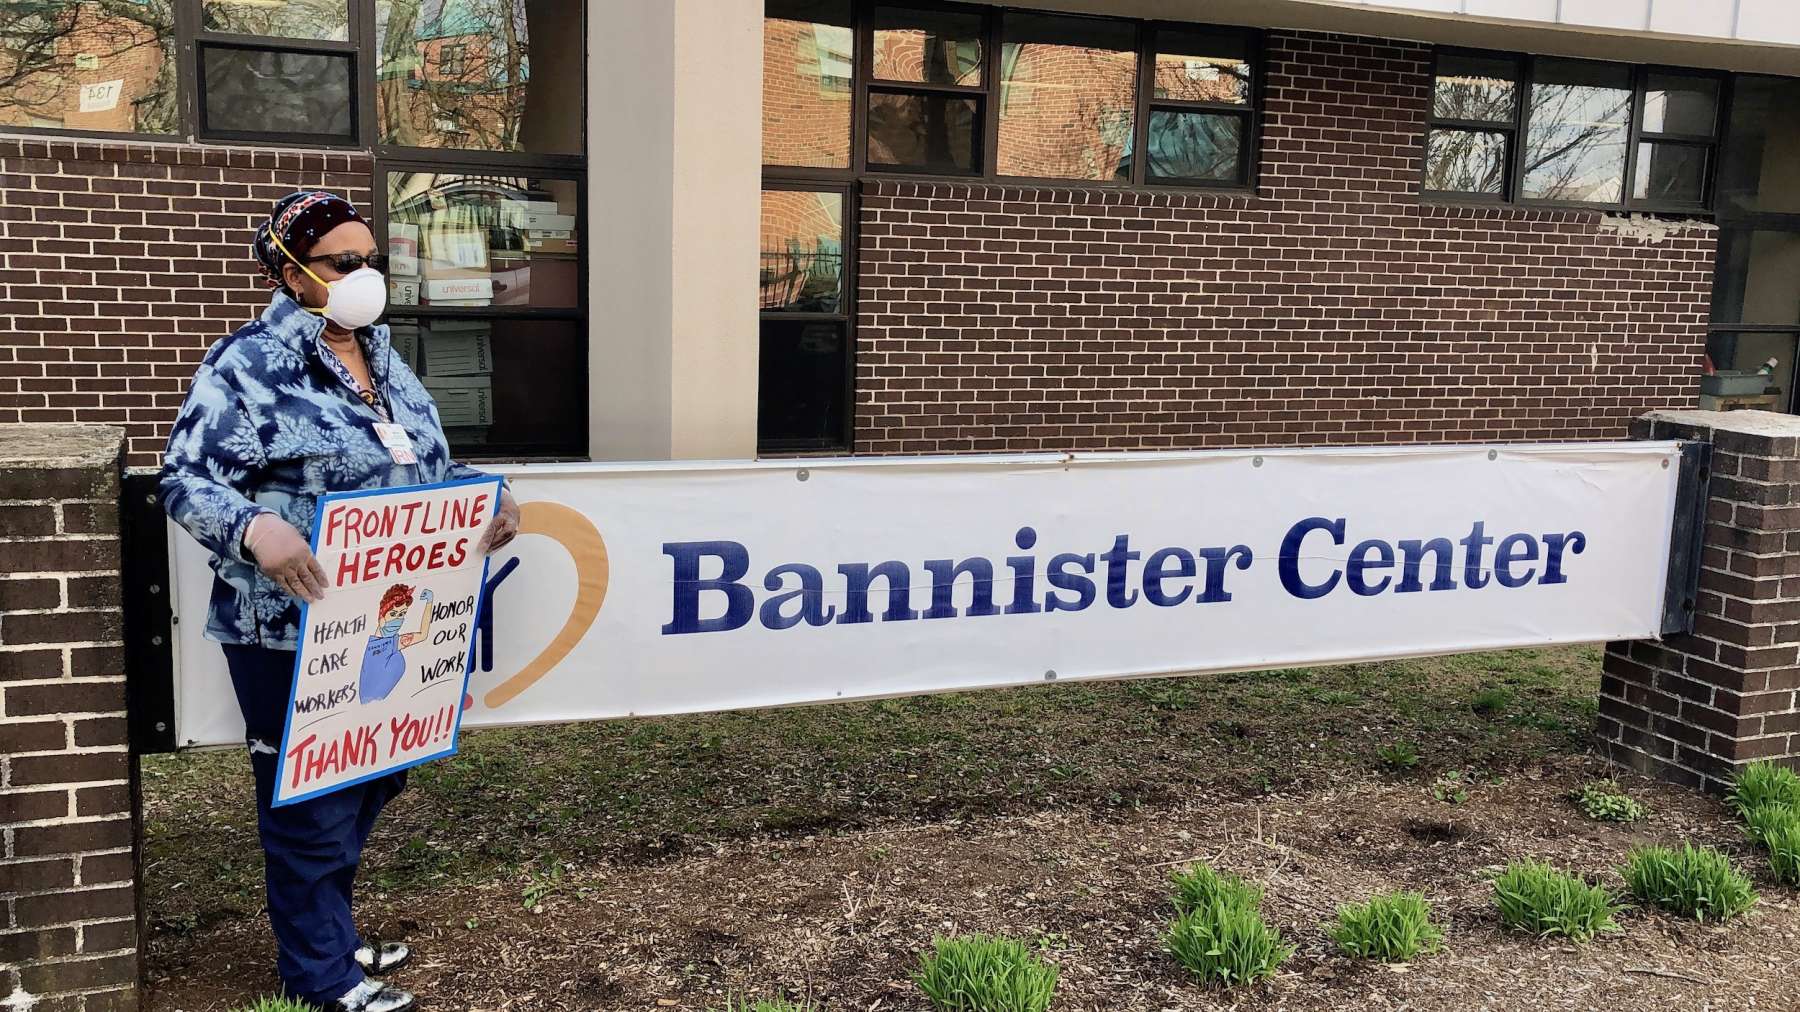 Front line workers demand Bannister Center provide hazard pay, PPE and safe staffing